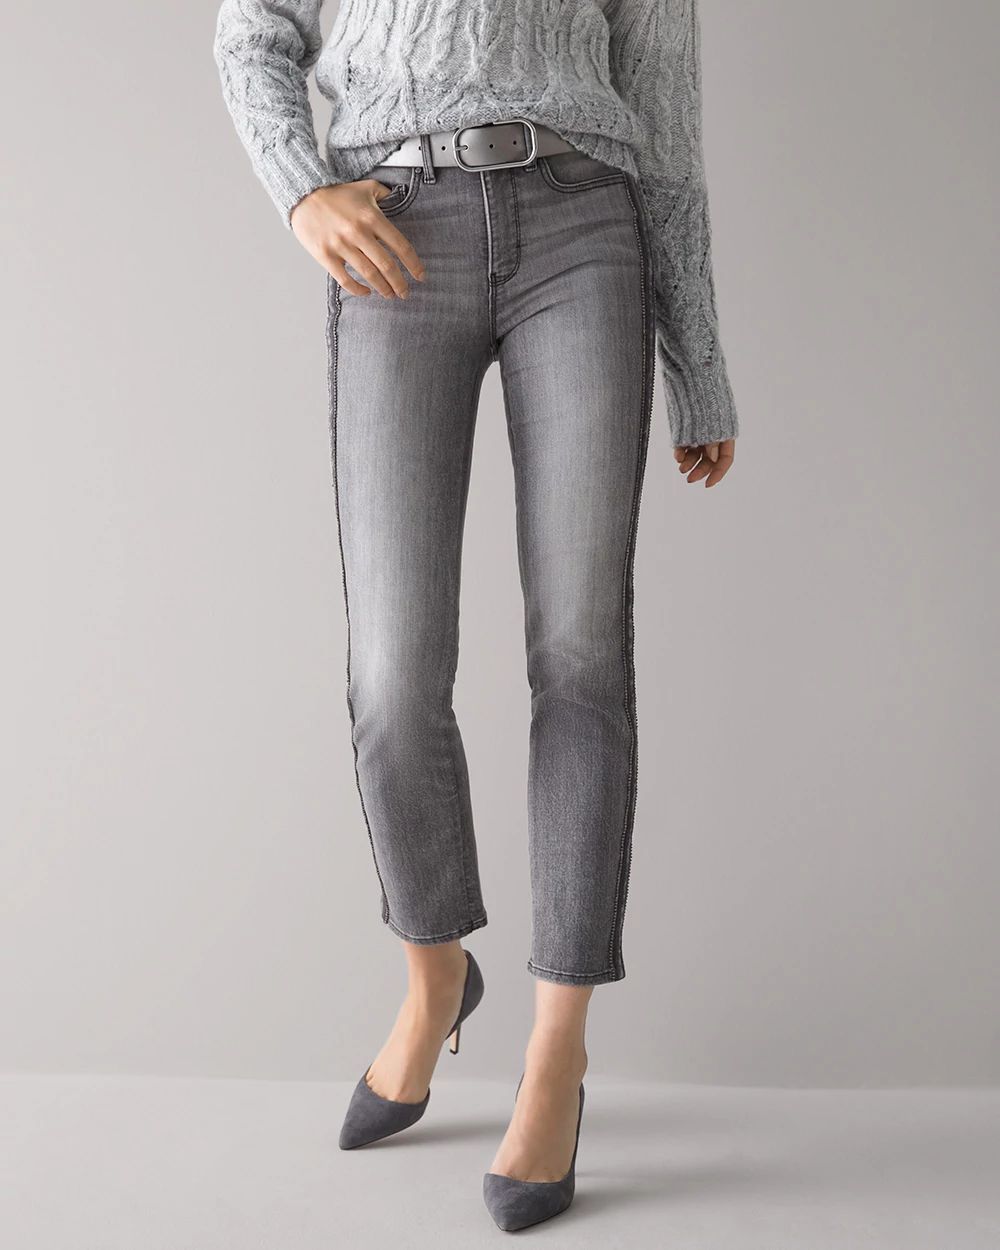 High-Rise Rhinestone Stripe Straight Jeans click to view larger image.